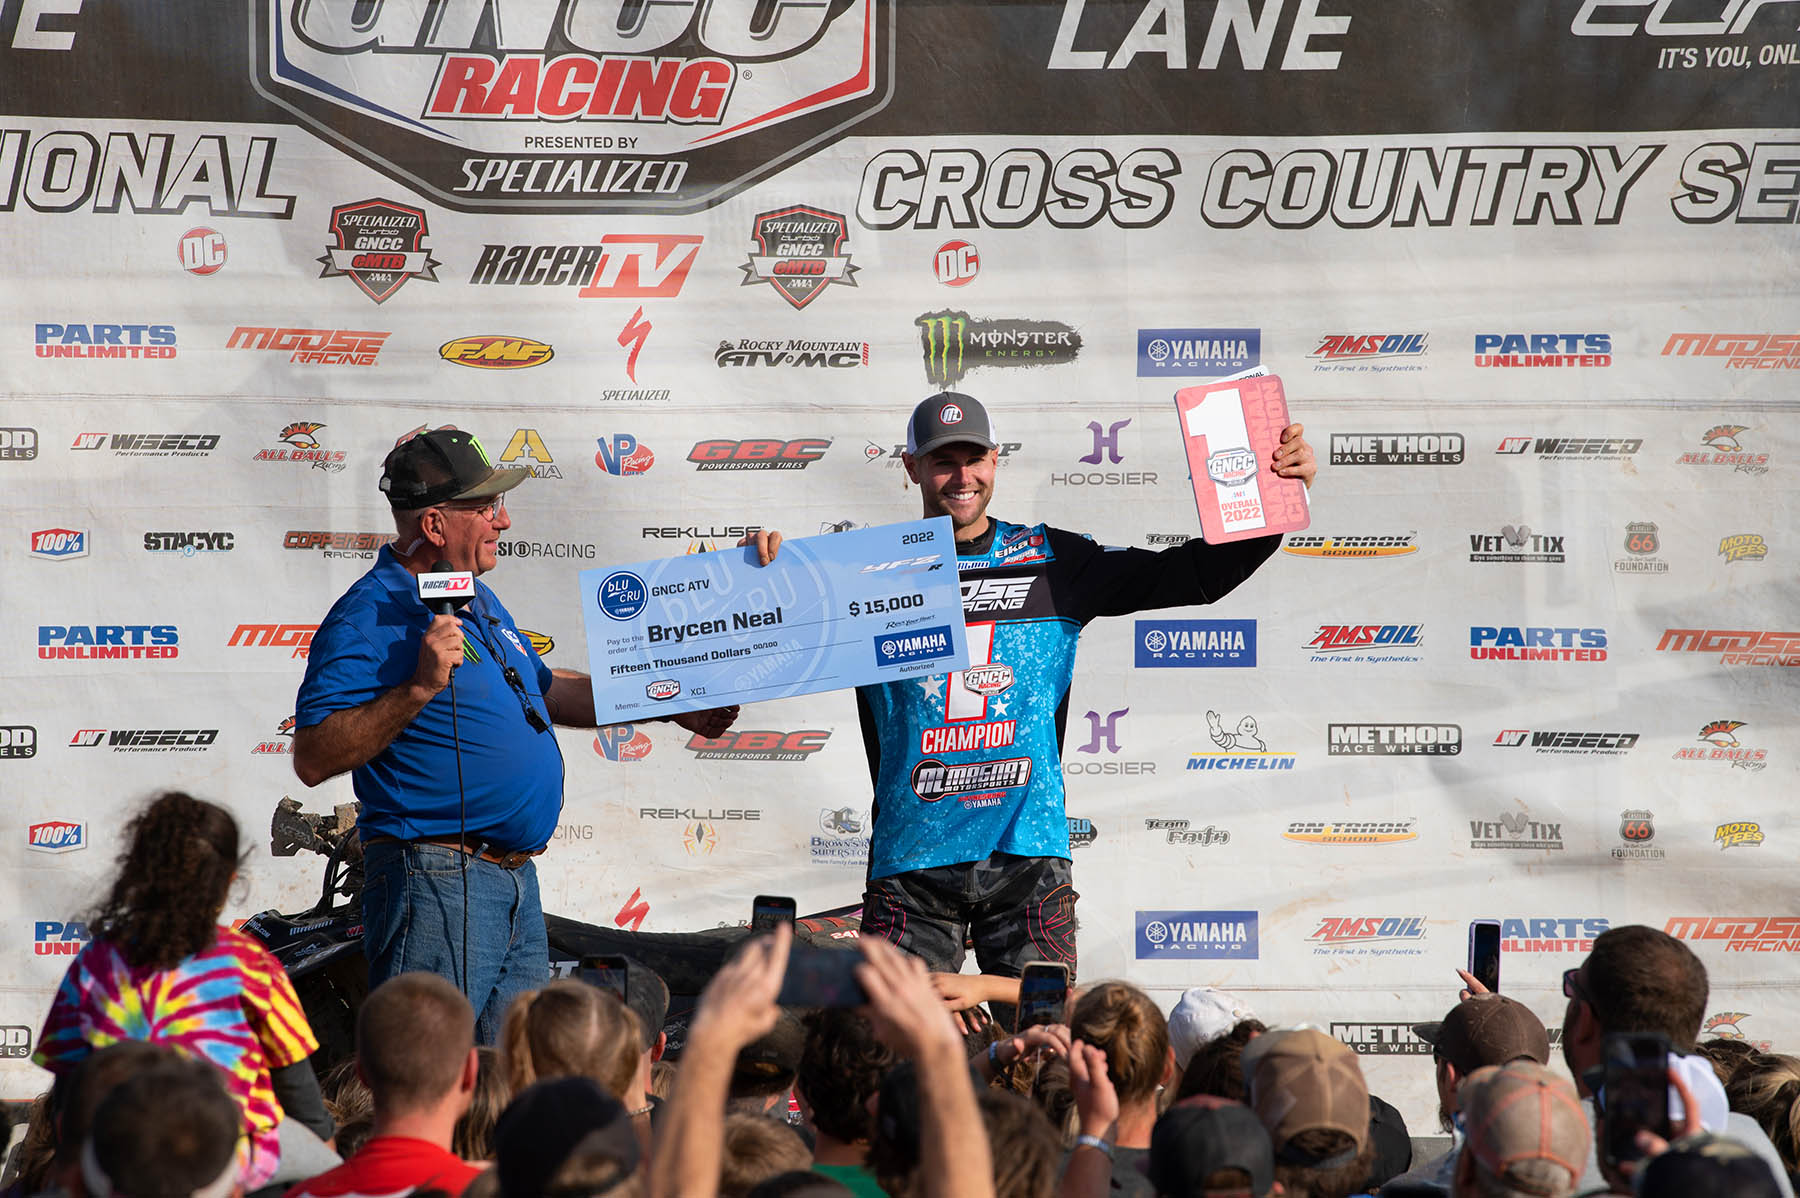 ATV Racer Brycen Neal holding up his check and trophy